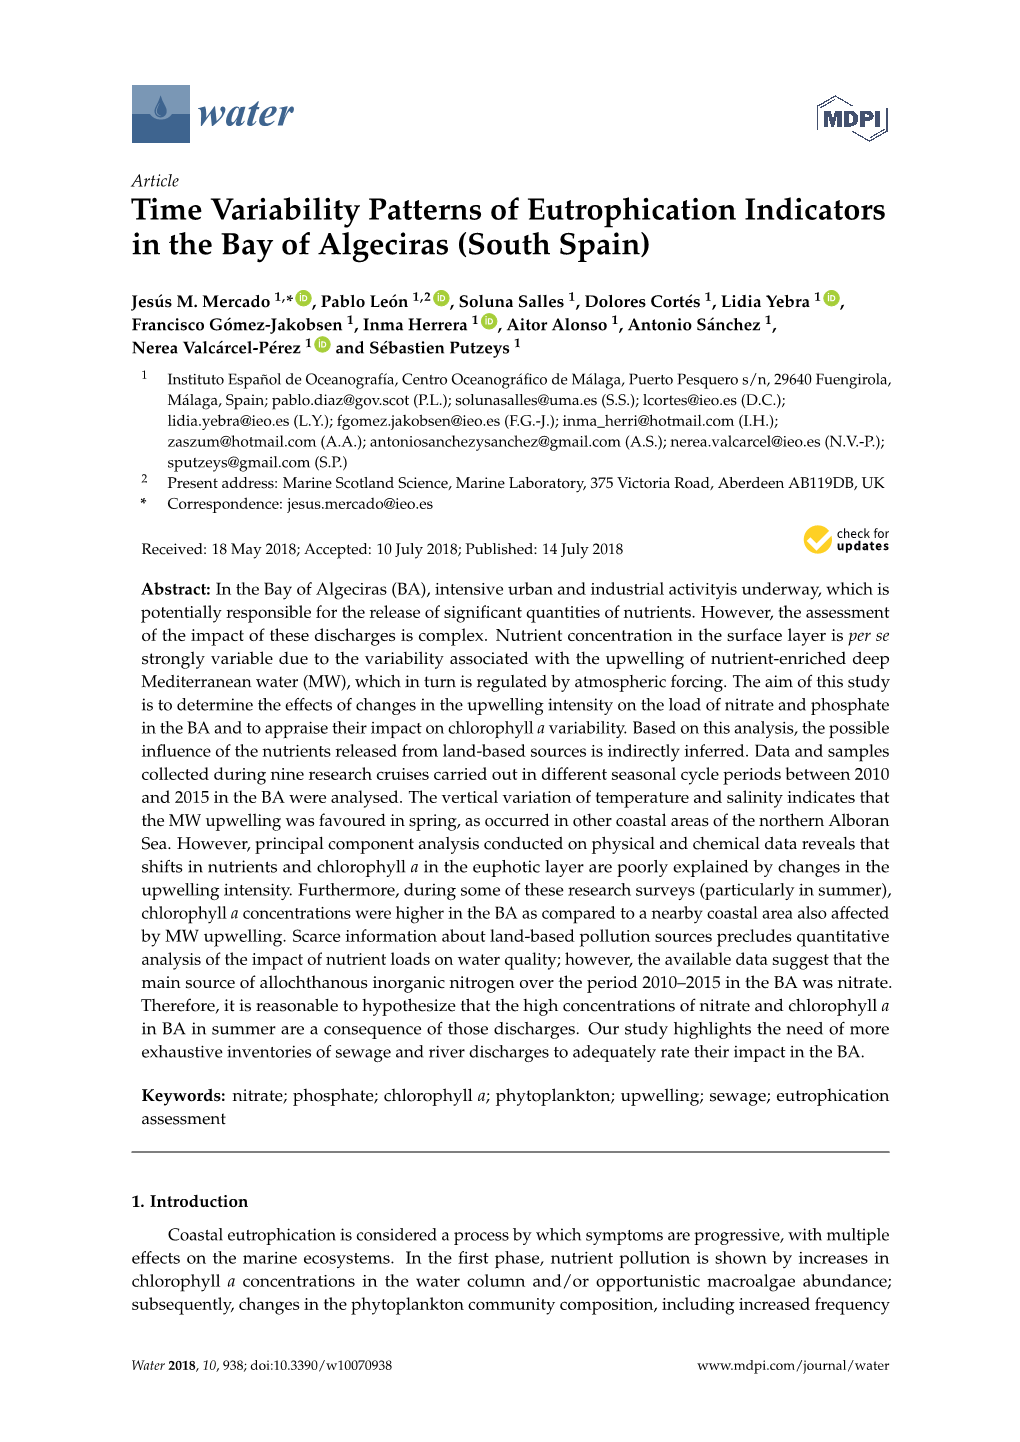 Time Variability Patterns of Eutrophication Indicators in the Bay of Algeciras (South Spain)